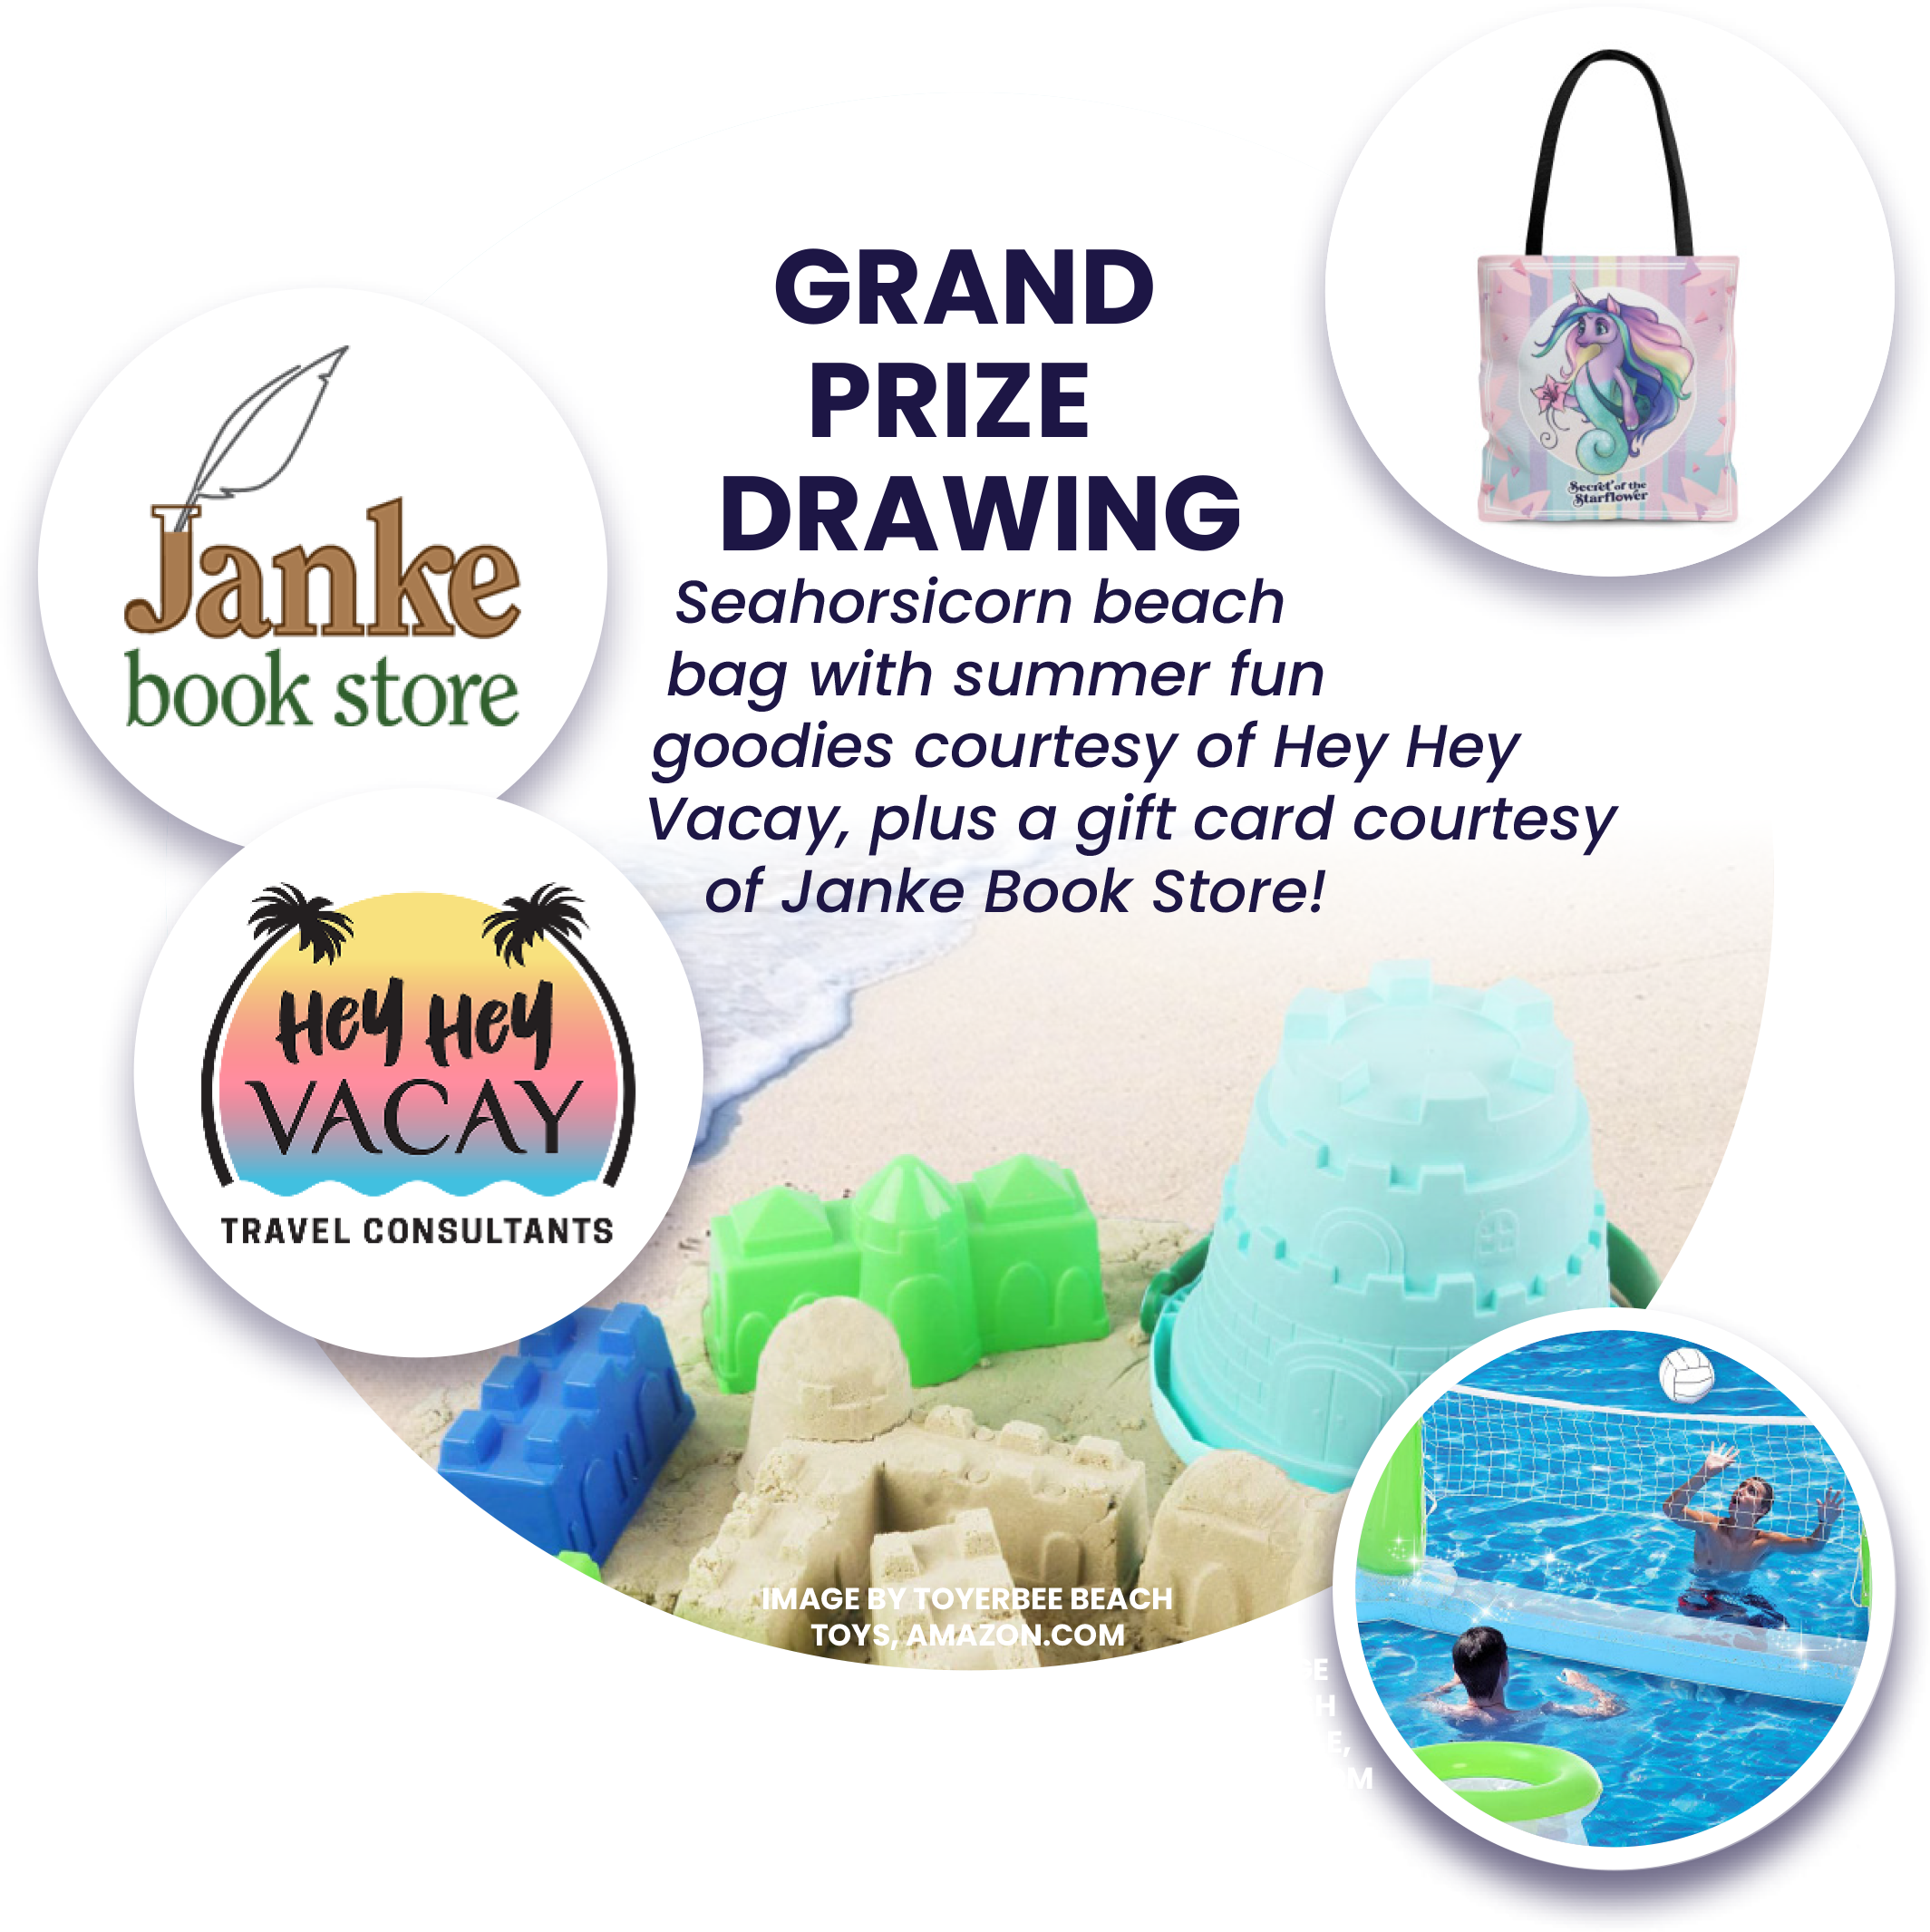 Grand Prize Drawing